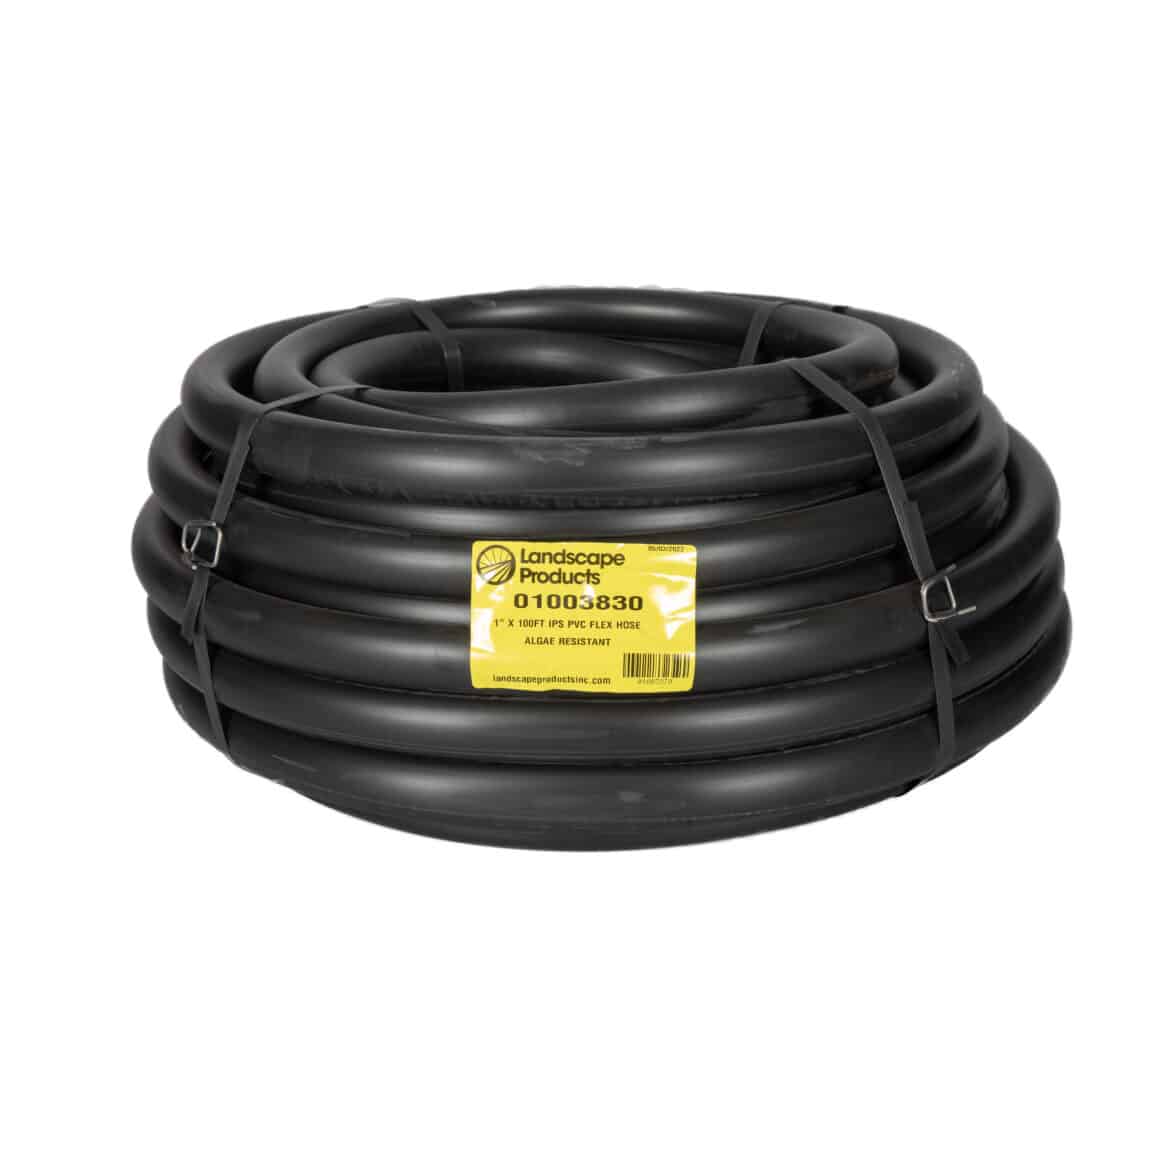 Landscape Products algae resistant IPS PVC Flex Hose provides more flexibility and shock resistance than rigid PVC pipe. It is useful in maneuvering around obstacles and can be used as flexible swing joints to prevent damage to rigid pipes. This hose is suitable for use as risers for both agricultural and turf irrigation sprinkler or low volume irrigation system installations. It is intended for use with underground piping at operation pressures of 50 PSI with water flow acting as a coolant for the hose. The hose easily bonds to PVC pipe fittings and, for the proven best adhesion, it is recommended that Weld-On #795 or equal be used. It is not recommended for use in high pressure/high heat applications. Produced using algae resistant material Connect drip laterals to rigid PVC submains Repair breaks in rigid PVC pipe Maneuver around obstacles Use as flexible swing joints to prevent damage to rigid pipes Use with Schedule 40 PVC fittings Available in 1/2-inch, 3/4-inch and 1-inch IPS size UV resistant additives protect against the harmful effects of the sun Flex PVC is not susceptible to environmental stress cracking Made in the USA California Prop 65 Compliant